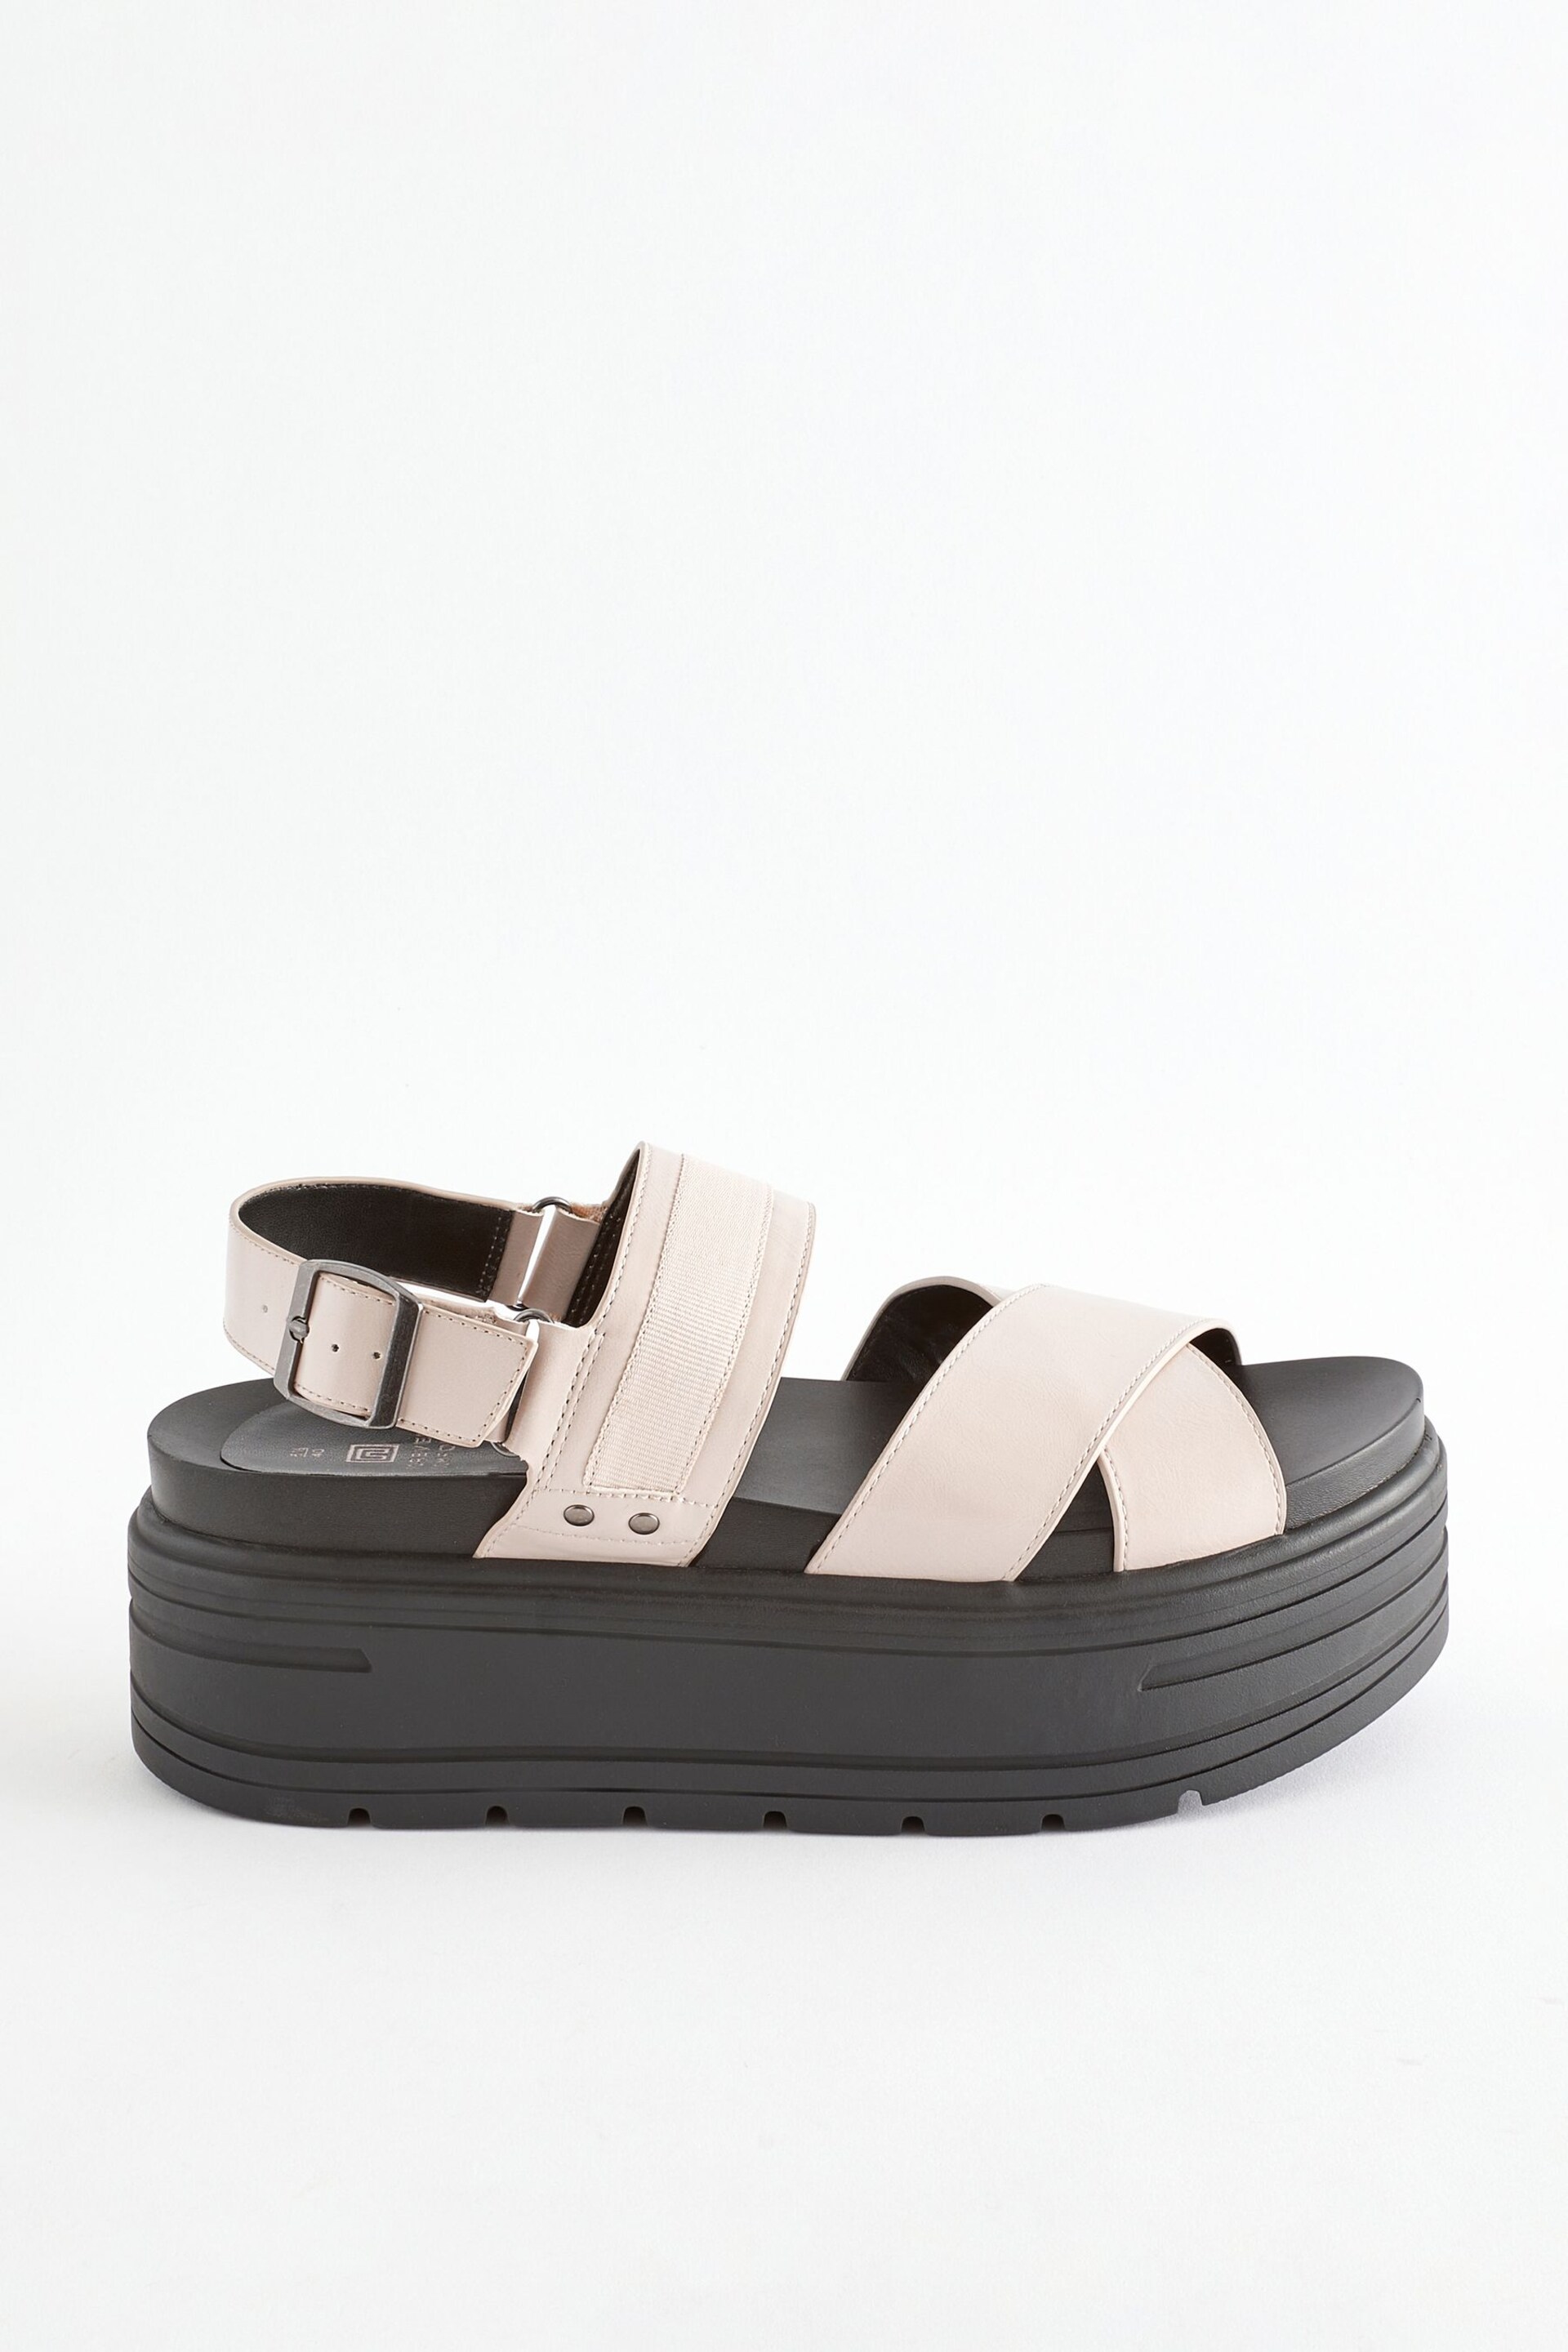 Bone Regular/Wide Fit Chunky Wedge Sandals - Image 4 of 8